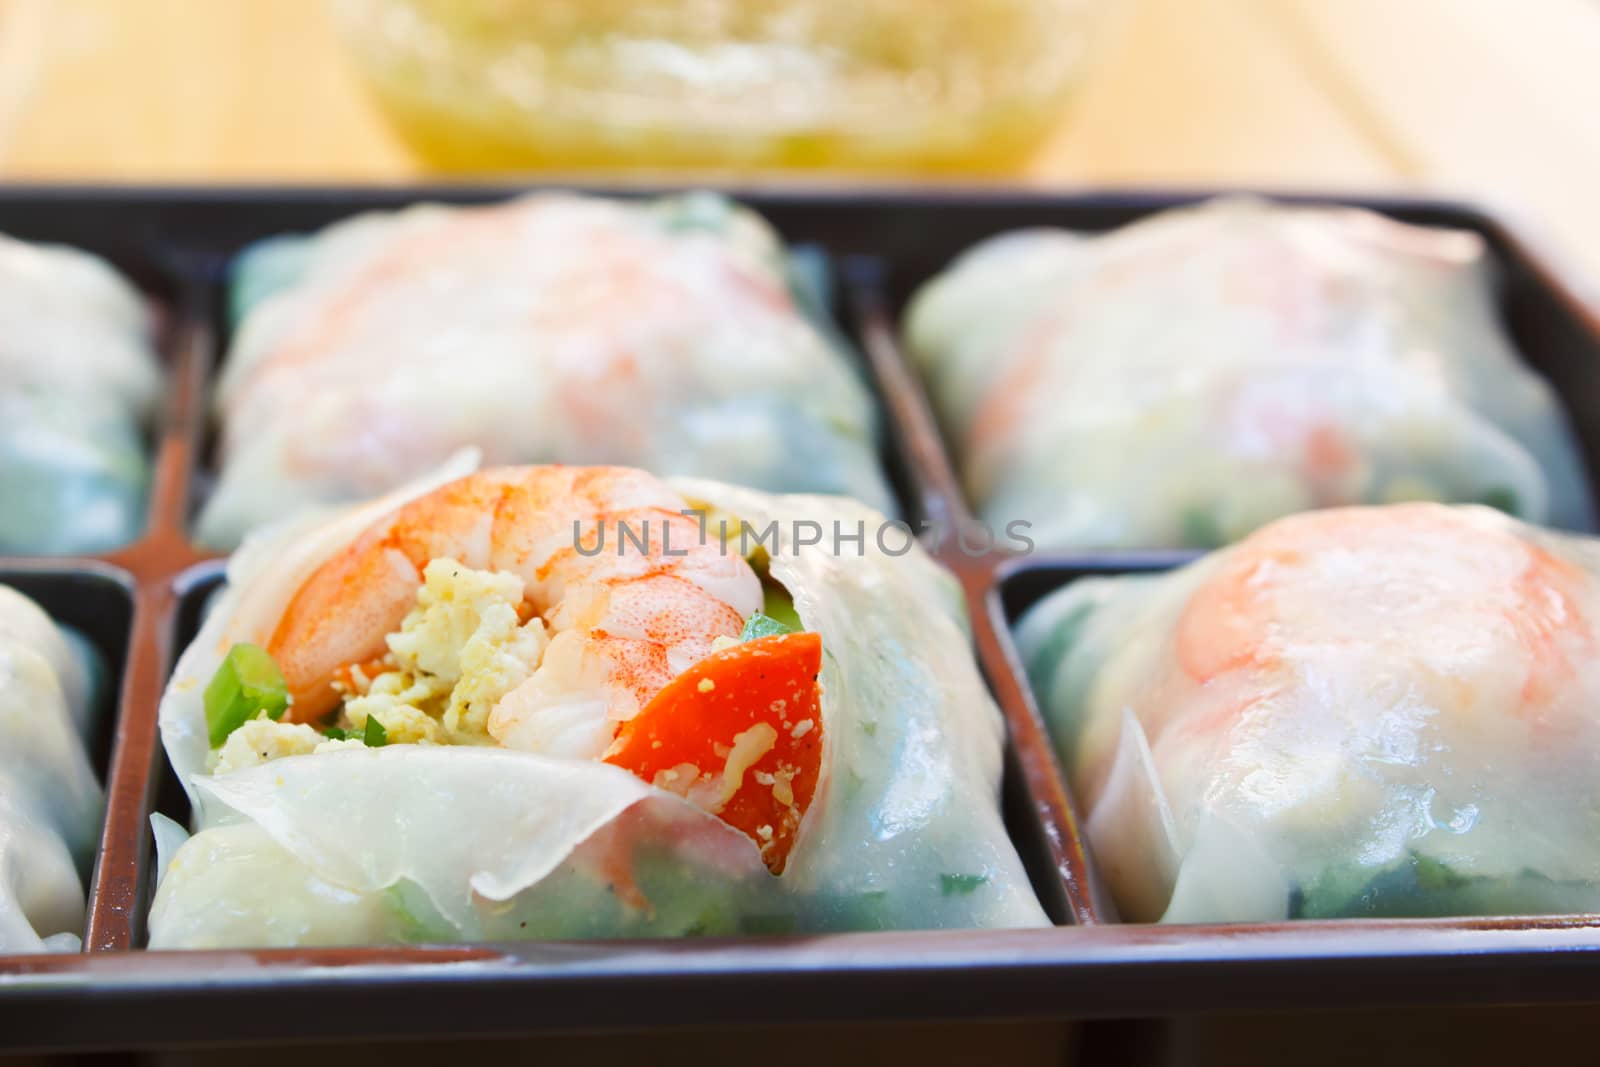 fresh noodle spring rolls with shrimp and vegetable, thailand.